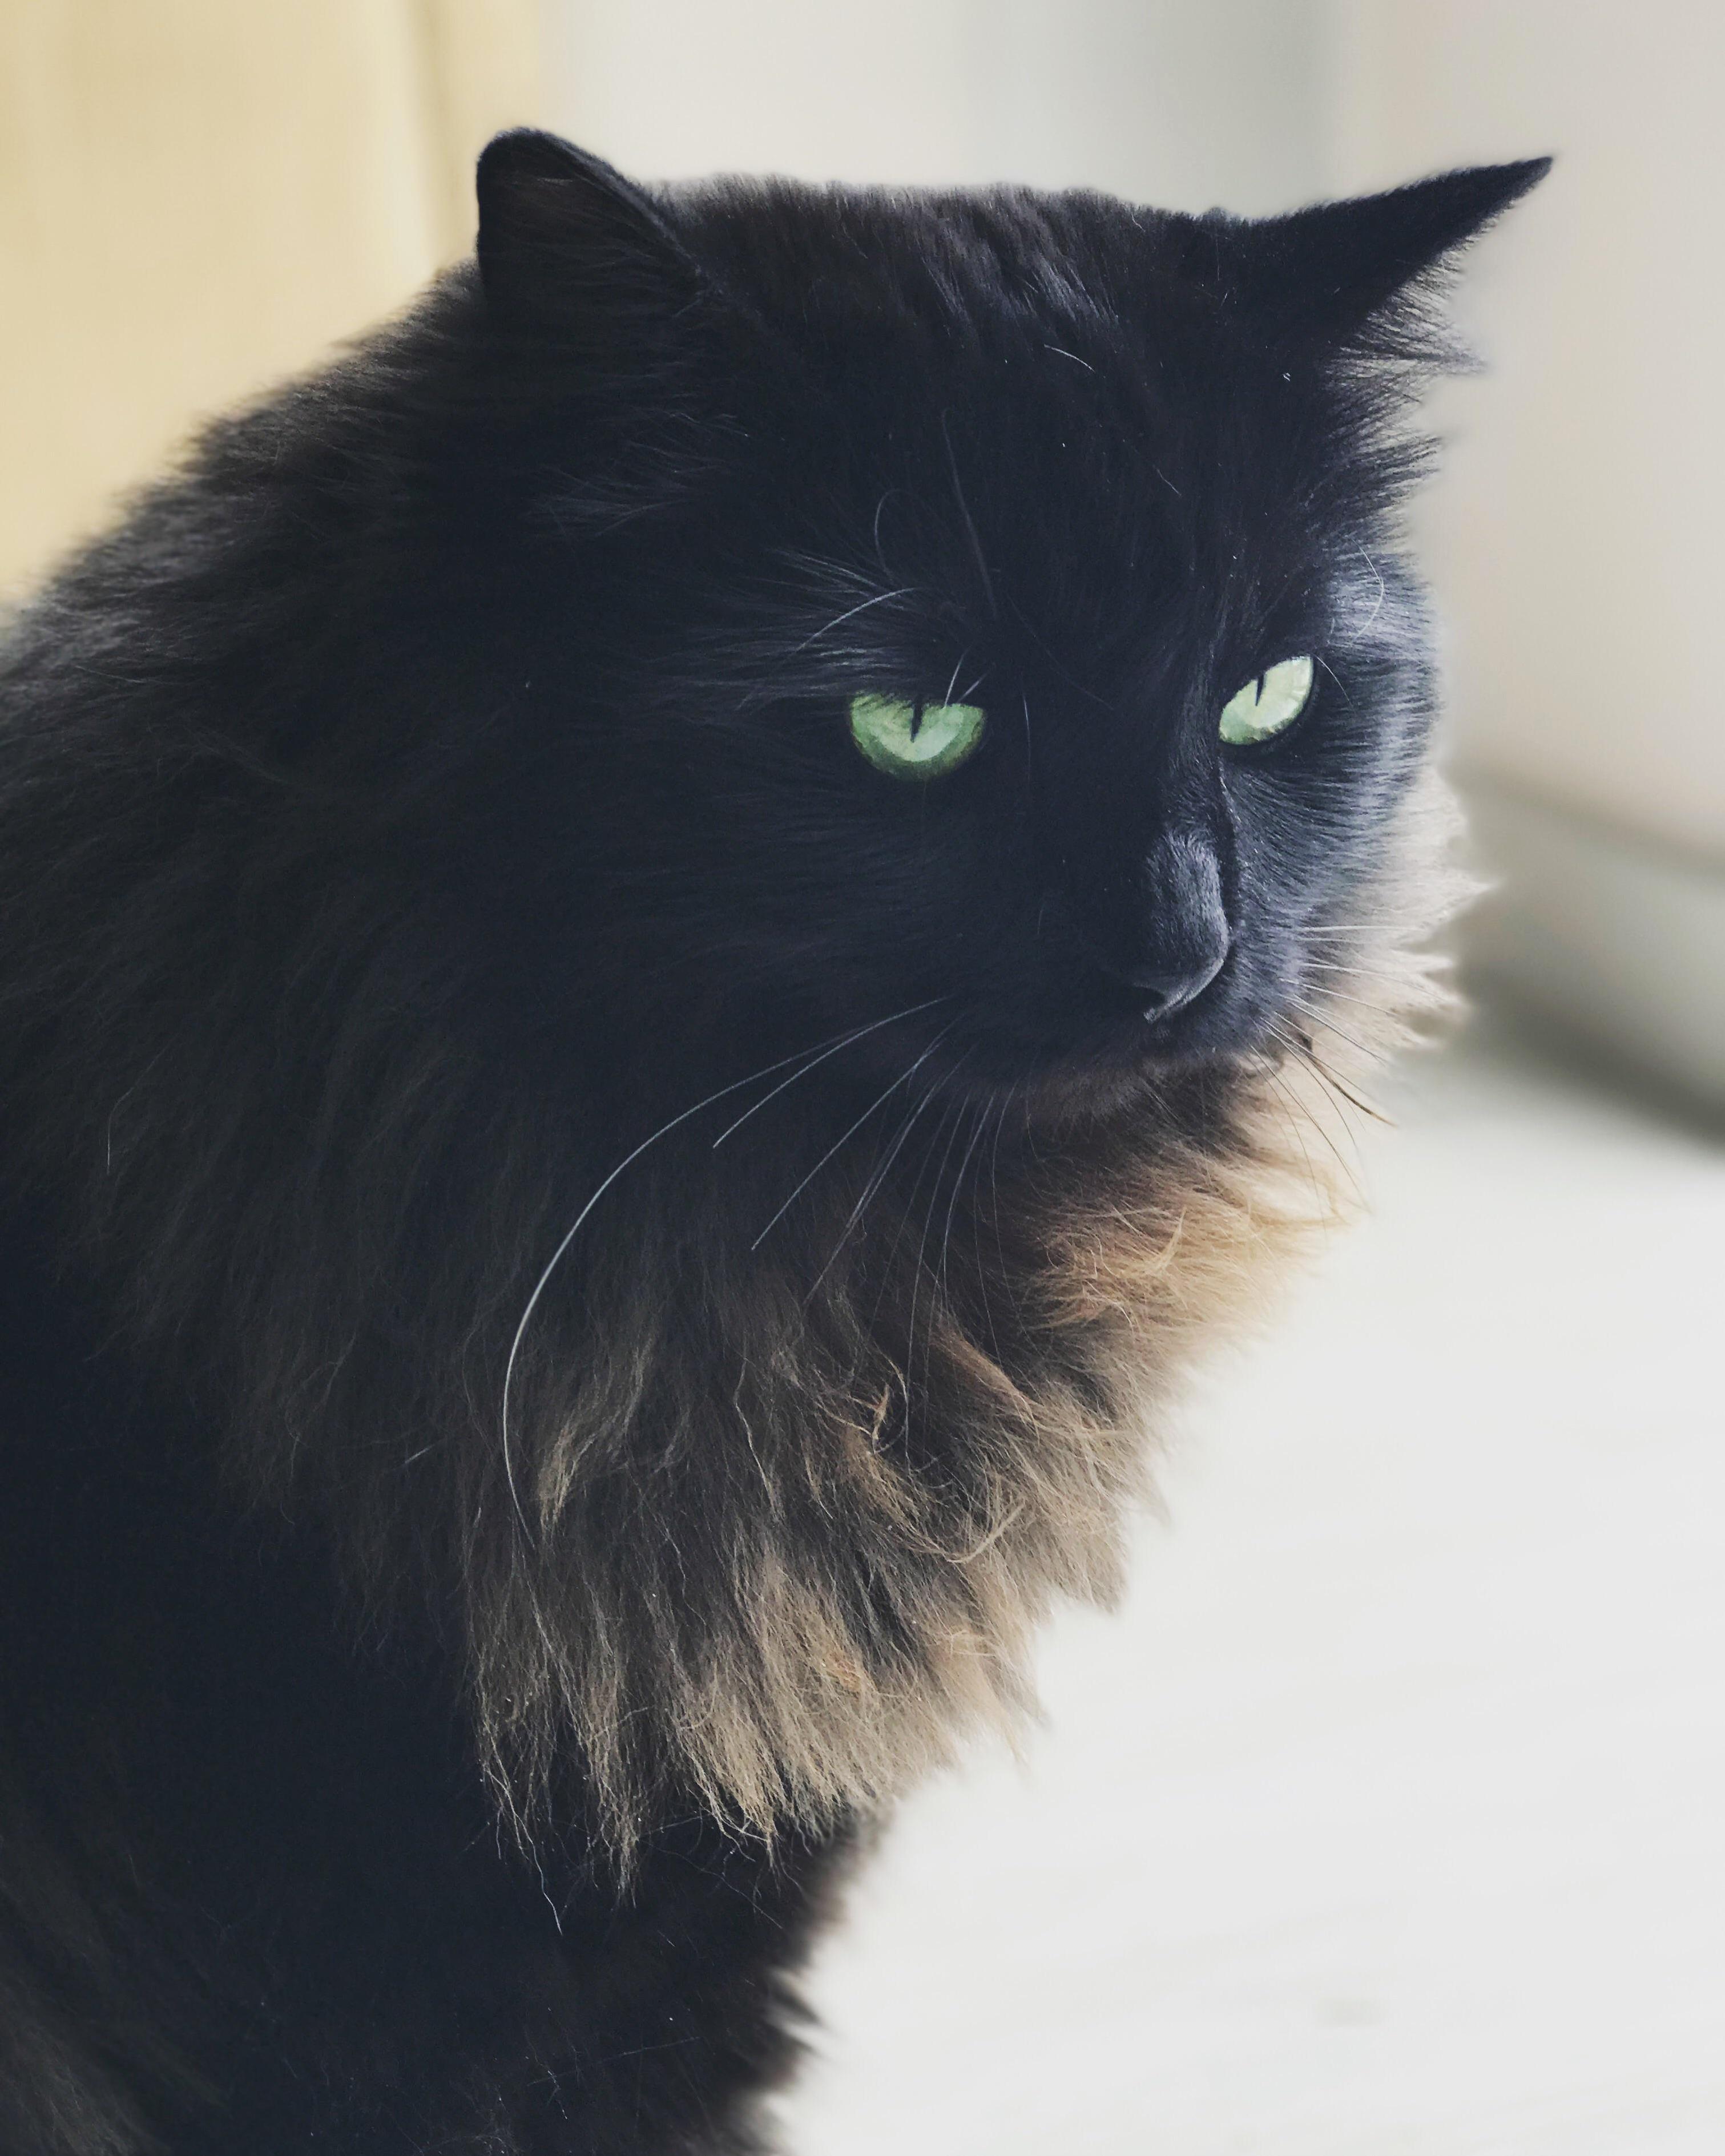 Accidentally got a pretty good glamour shot of oscar the viking cat this morning.